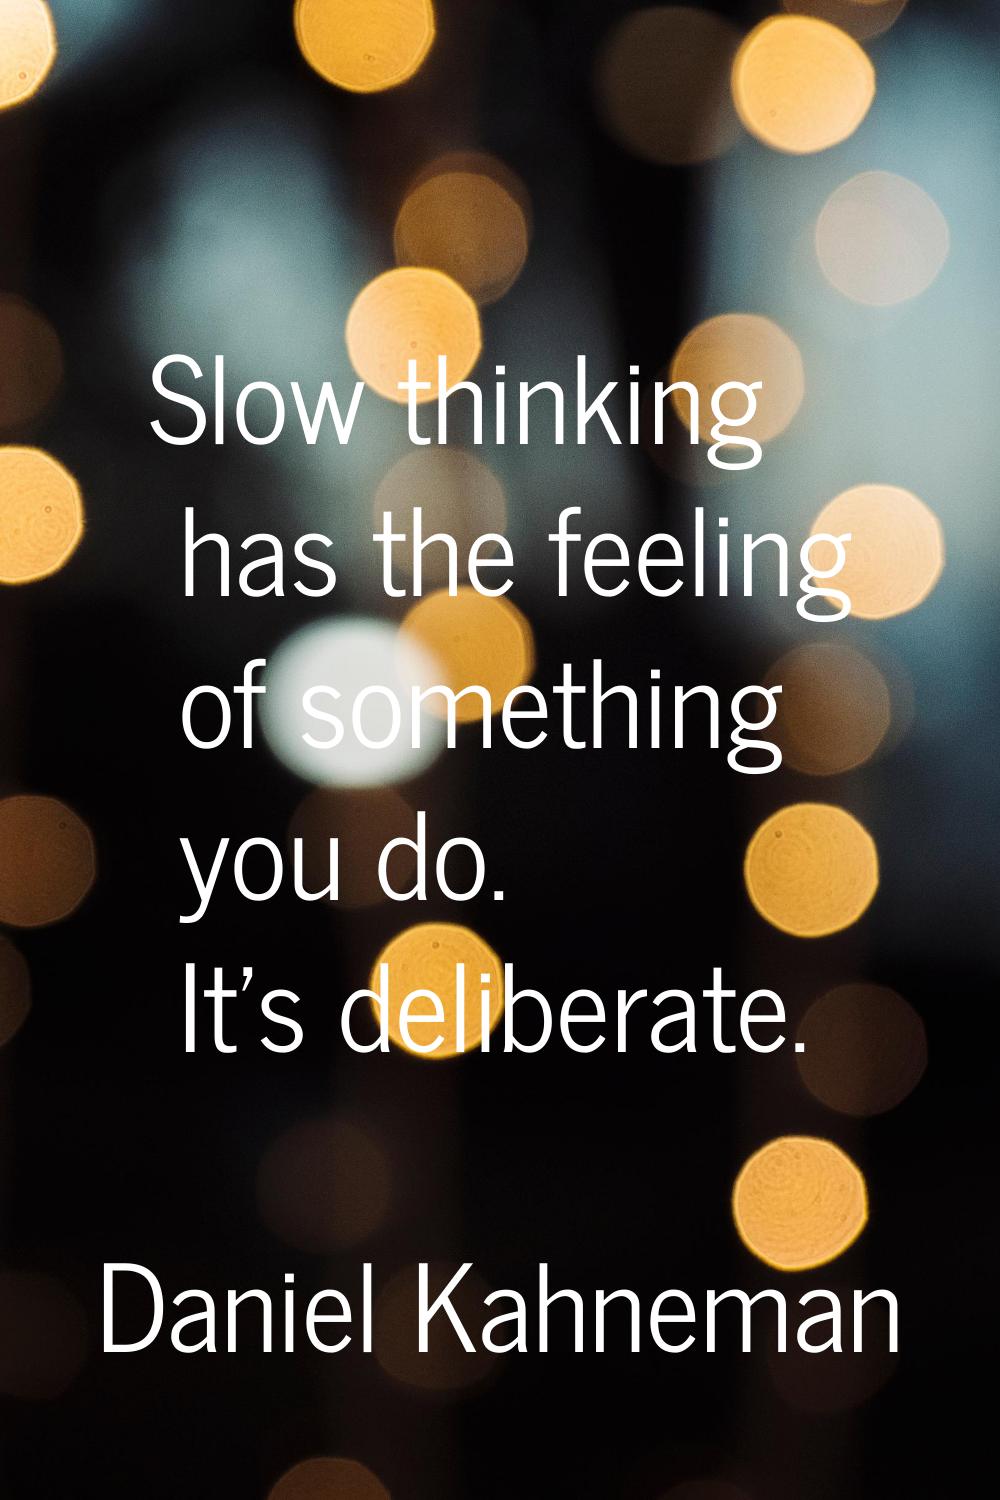 Slow thinking has the feeling of something you do. It's deliberate.